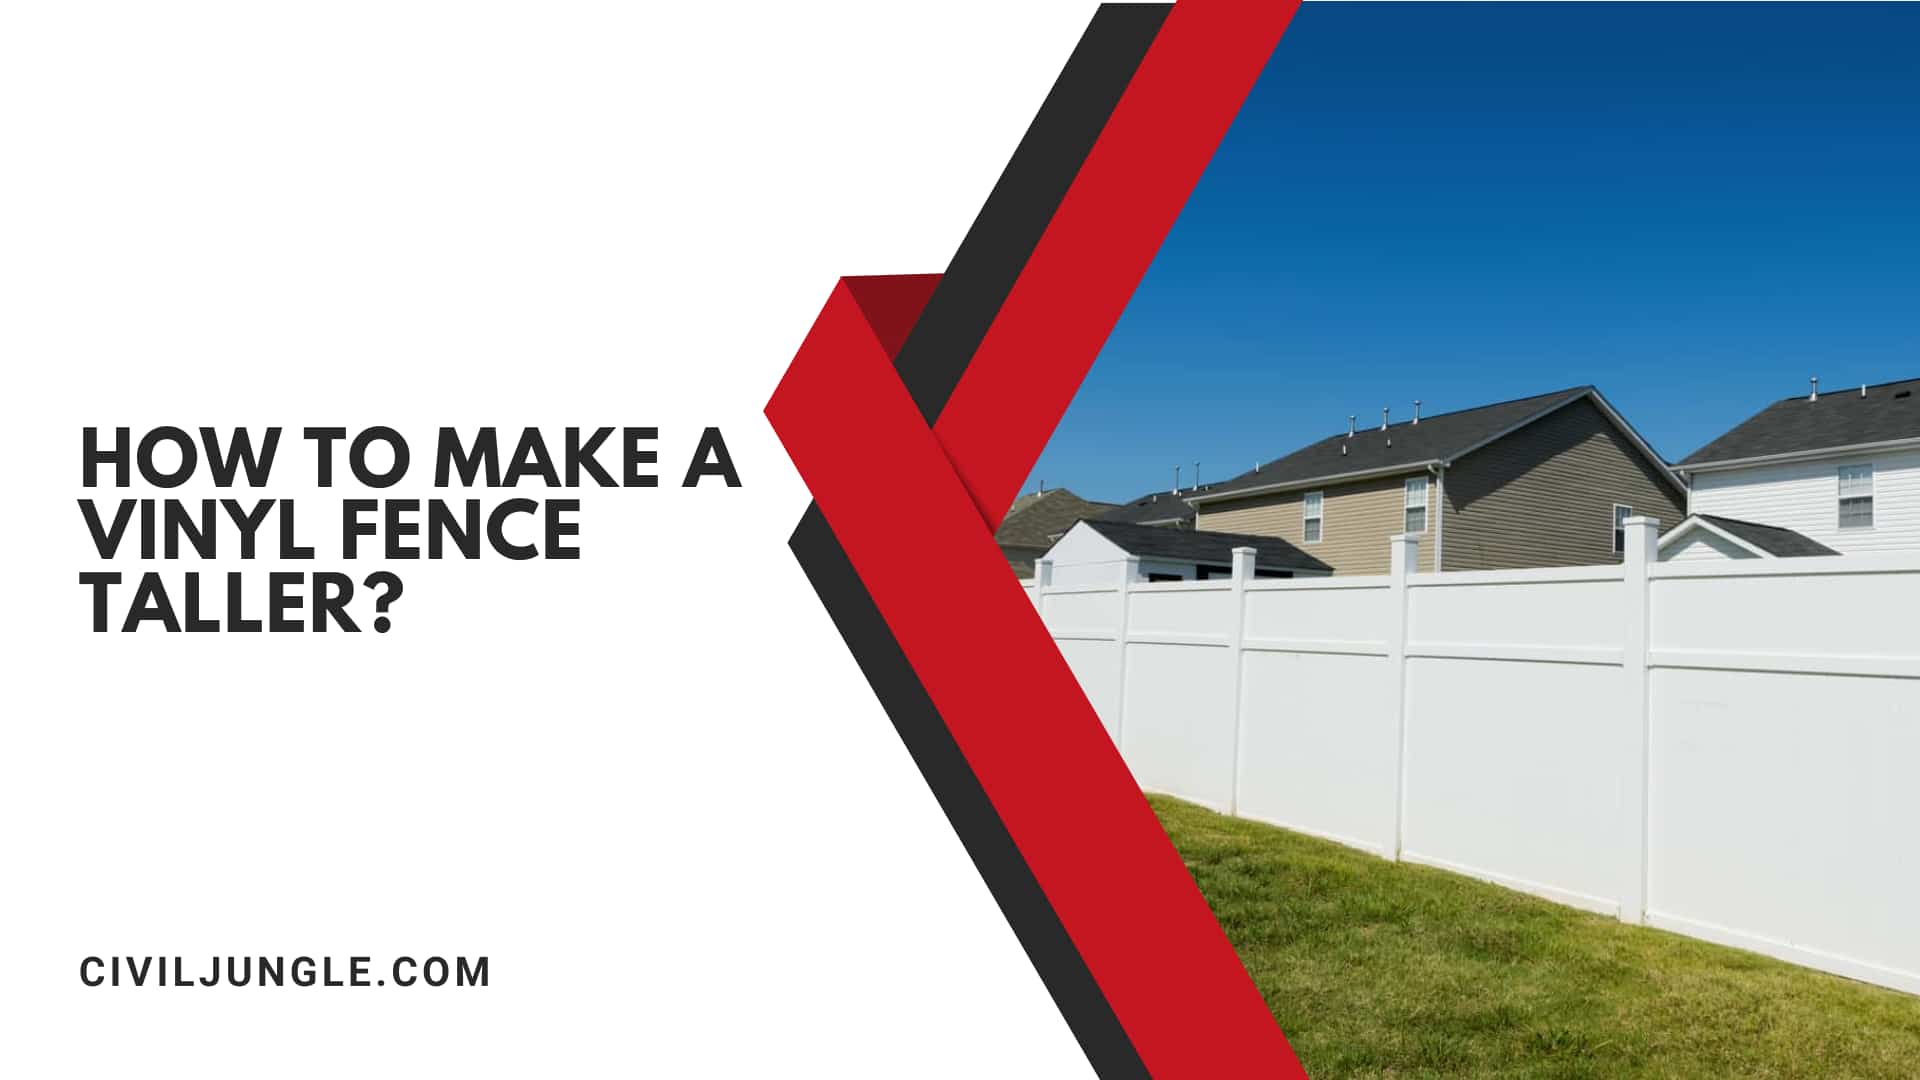 How To Make A Vinyl Fence Taller?